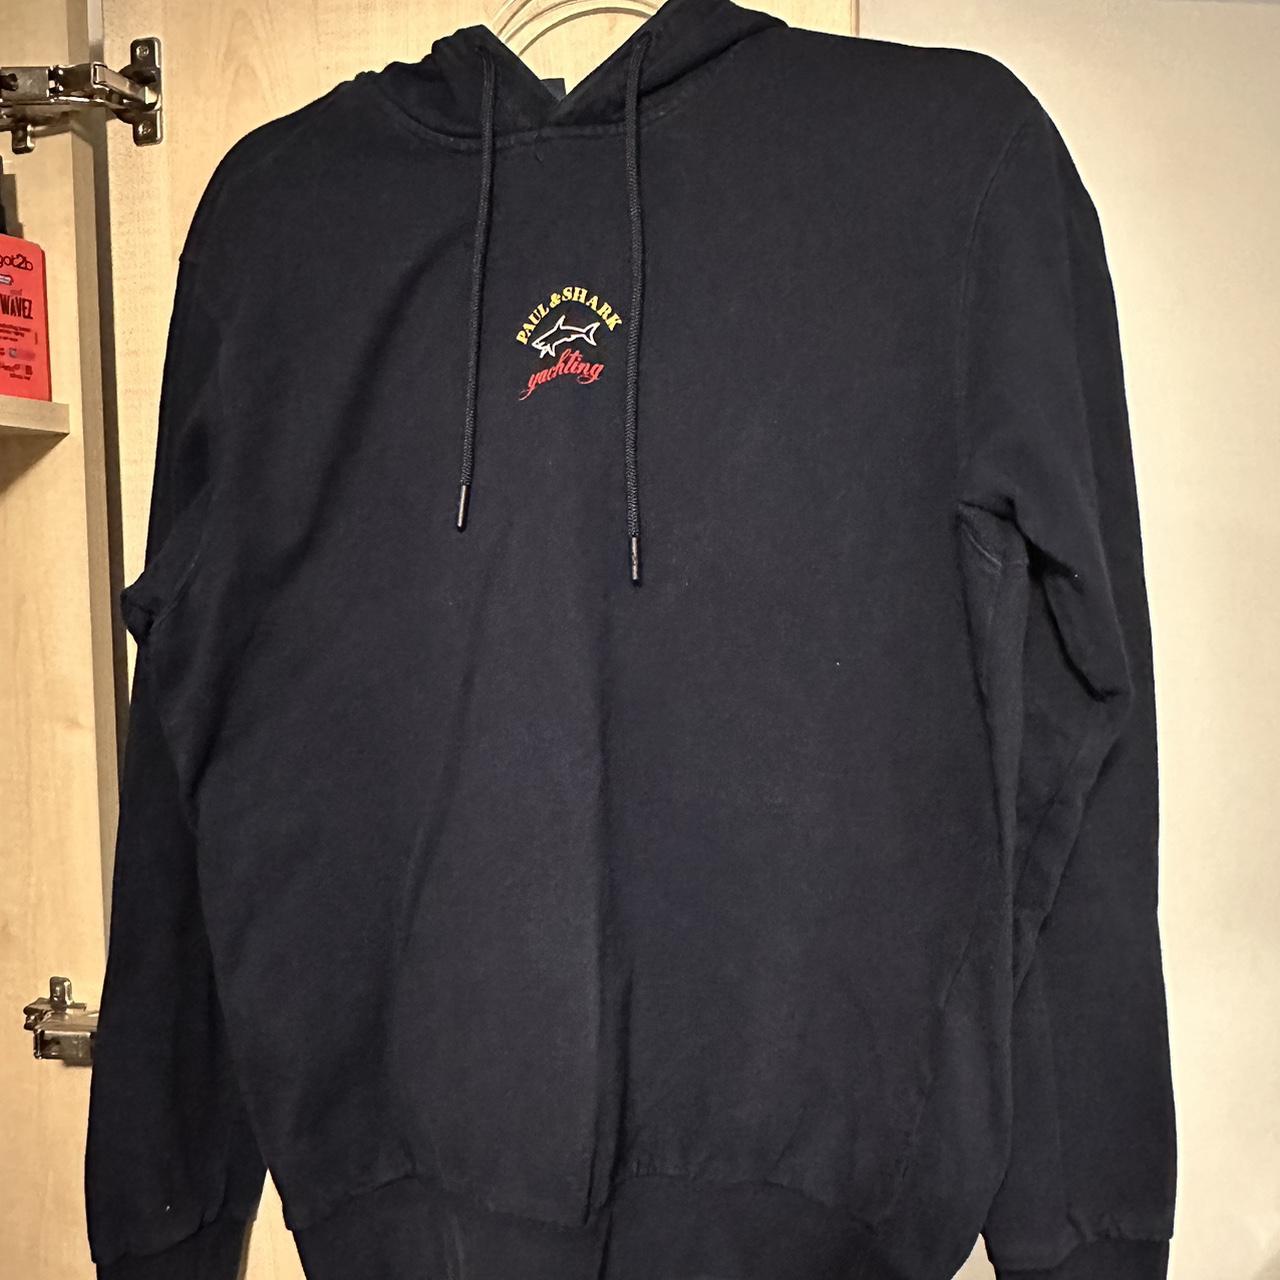 Paul and Shark Hoodie Size Small Worn a lot, no... - Depop